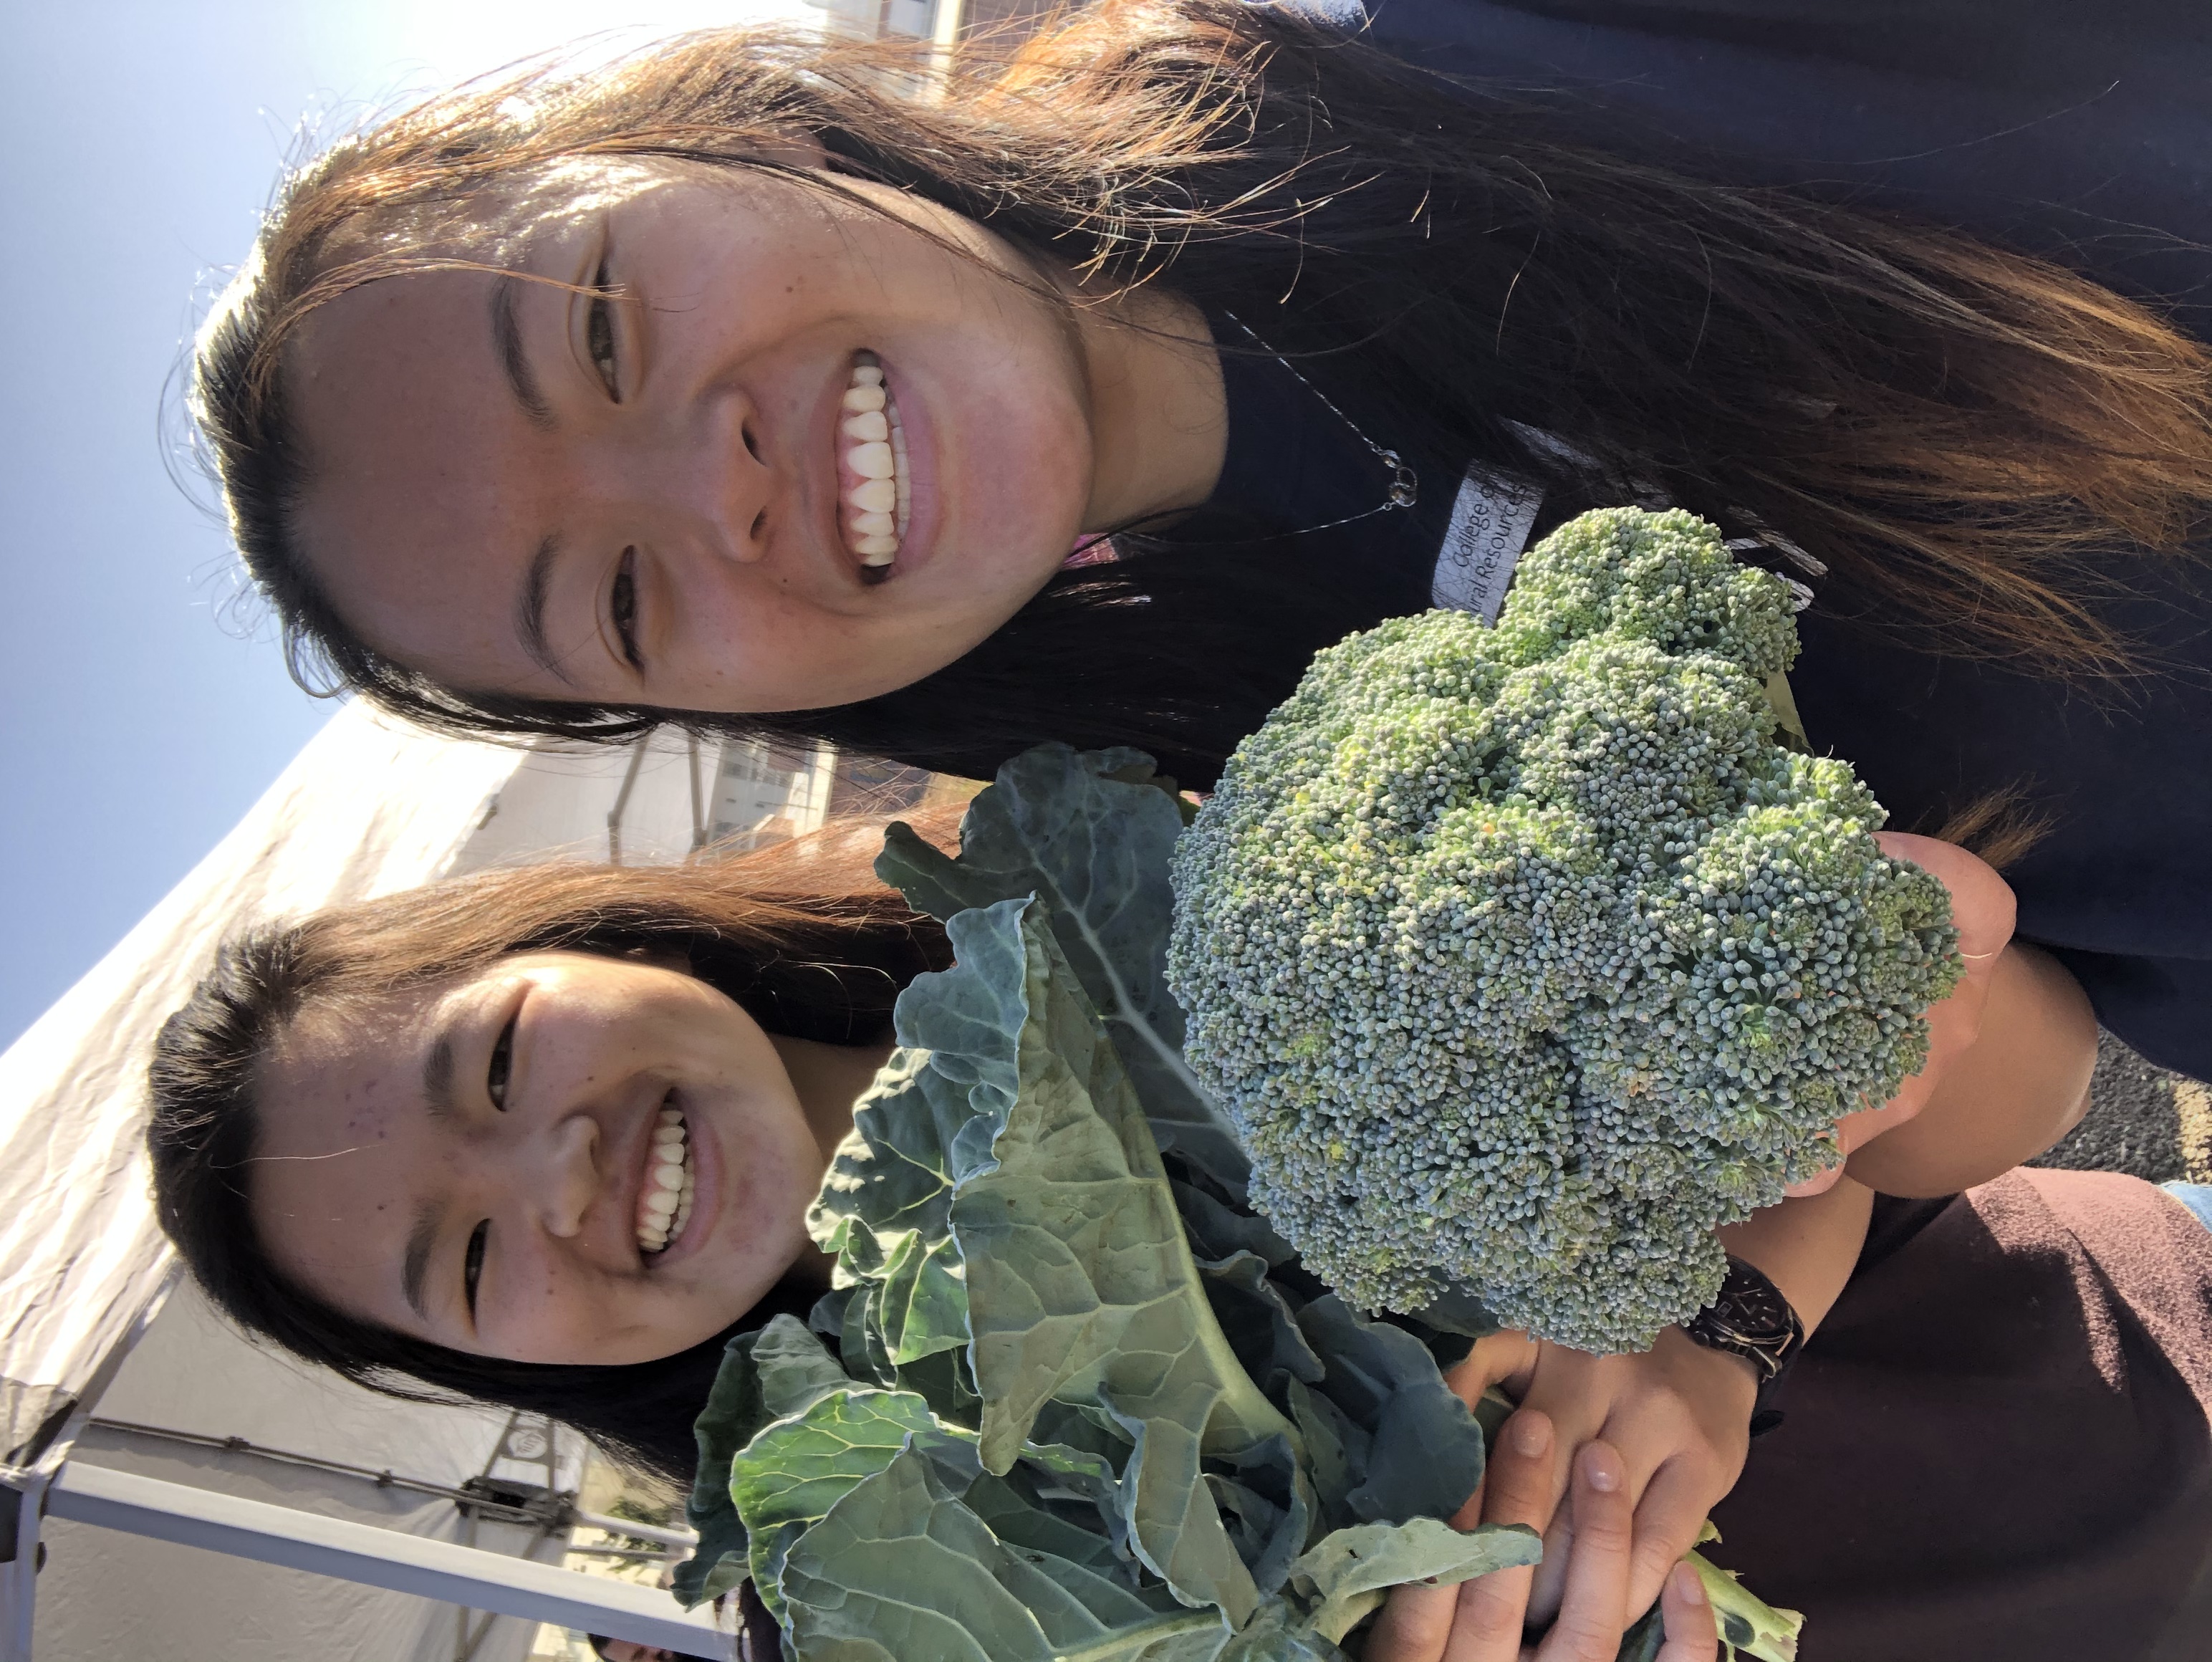 Cho and a friend holding broccoli